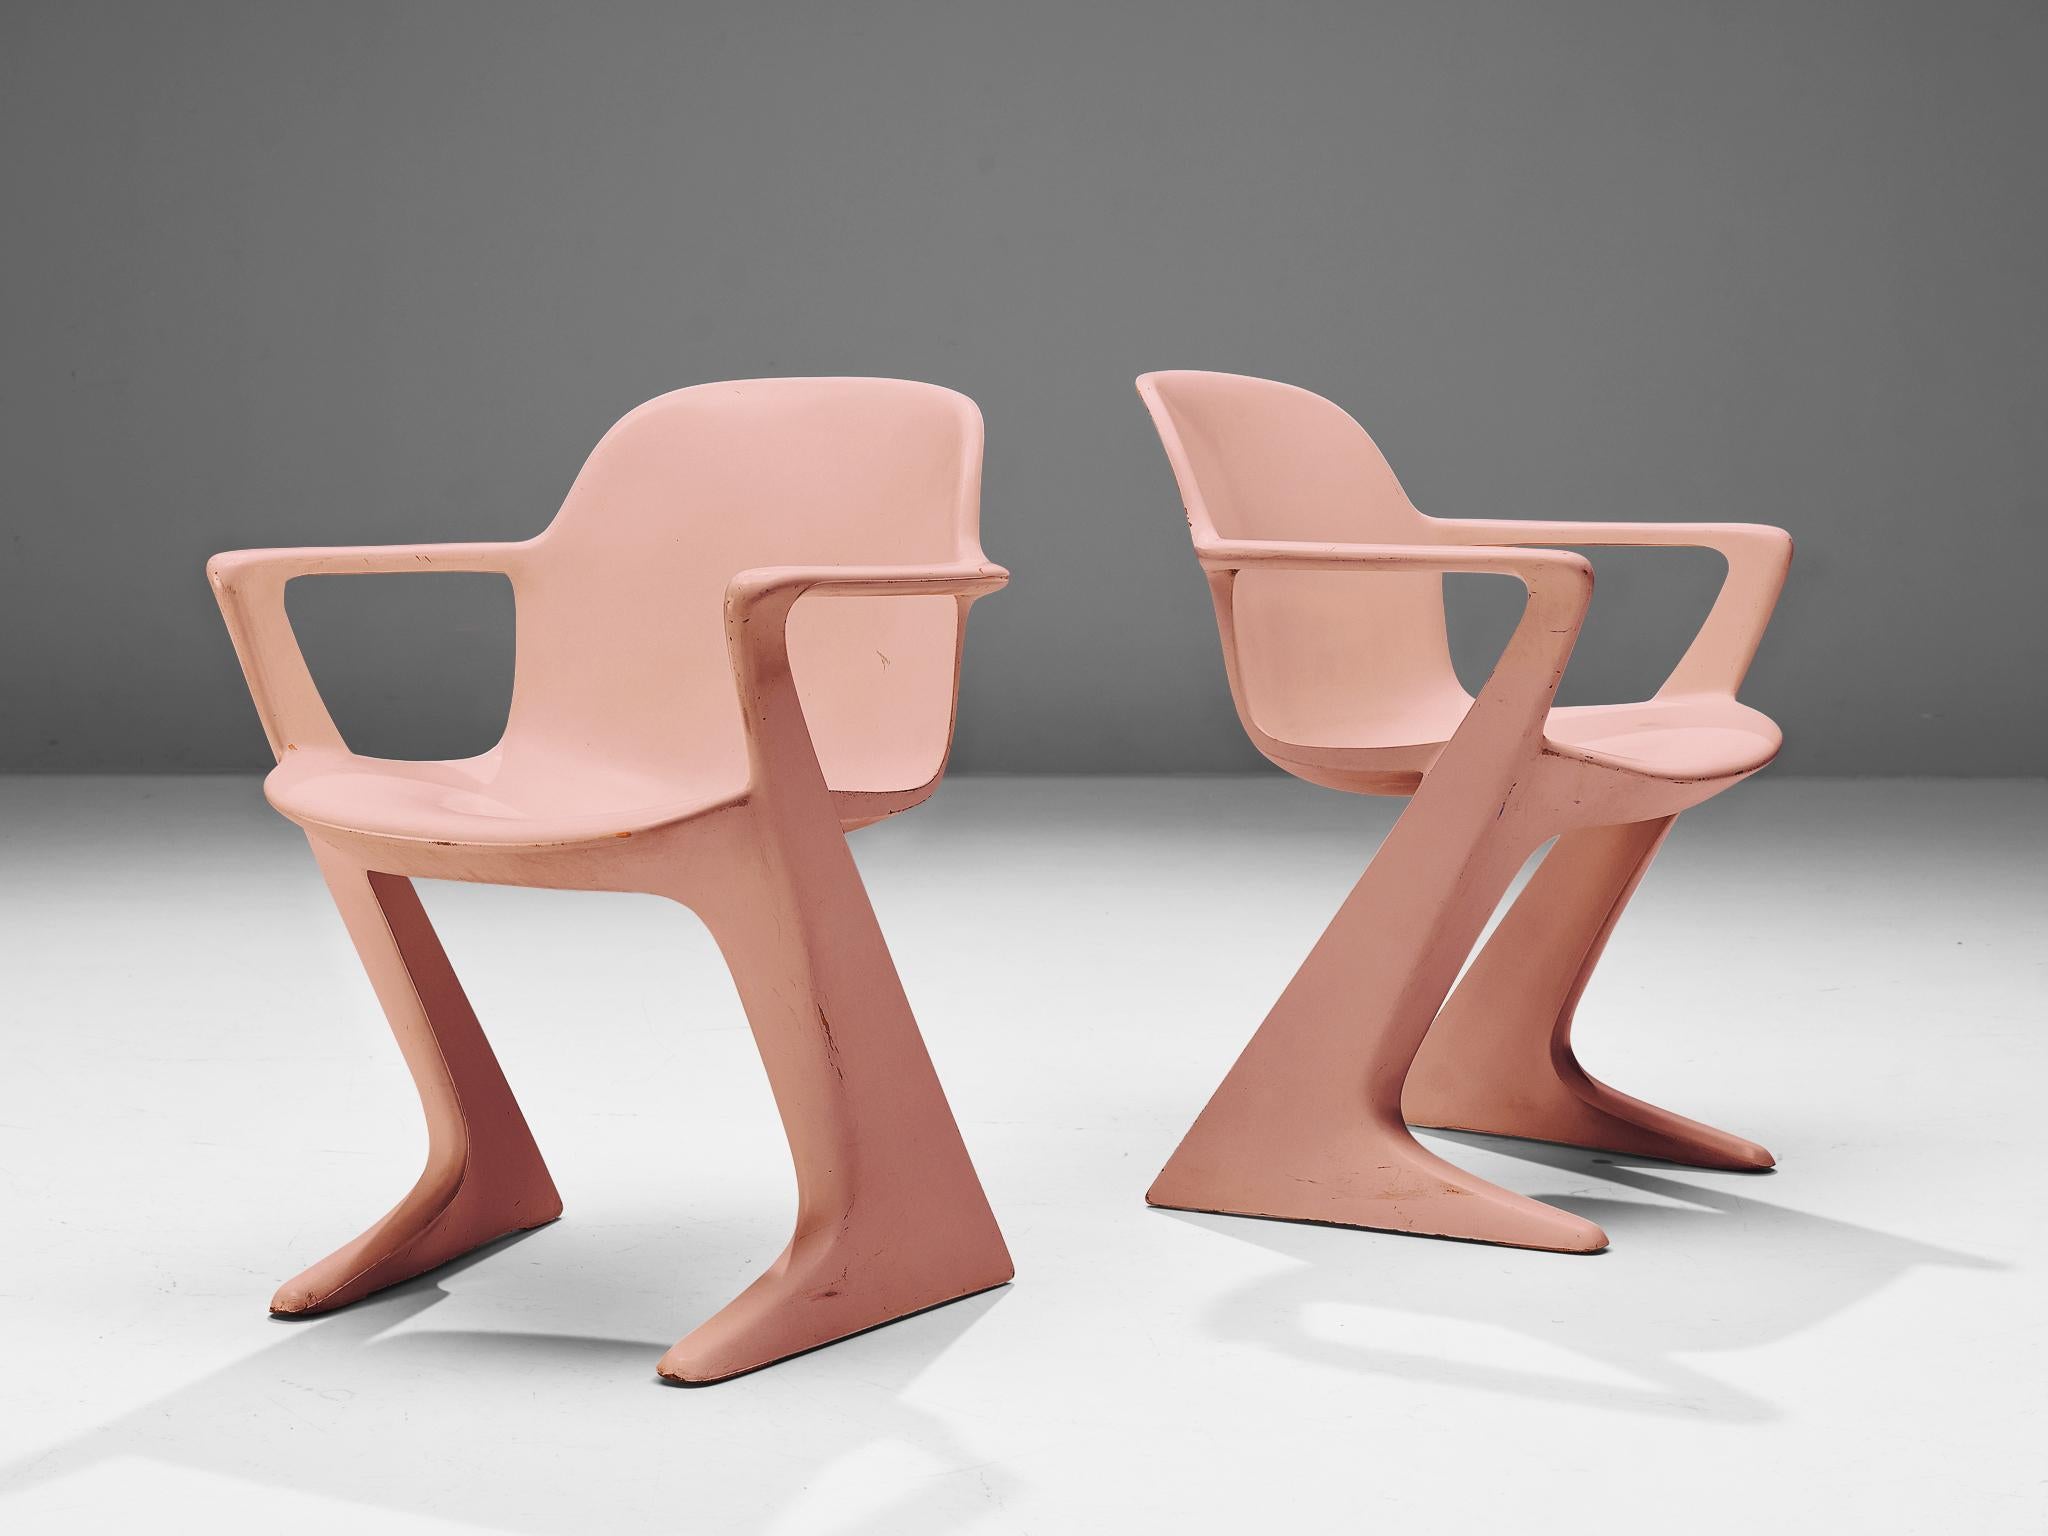 Ernst Moeckl for Trabant, 'Kangaroo' or 'Z' armchairs, fiberglass, Germany, designed in 1968

This pair of pink 'Kangaroo' chairs is designed by Ernst Moeckl in 1968. The chair is also called the 'Z-chair', referring to its shape. During the period